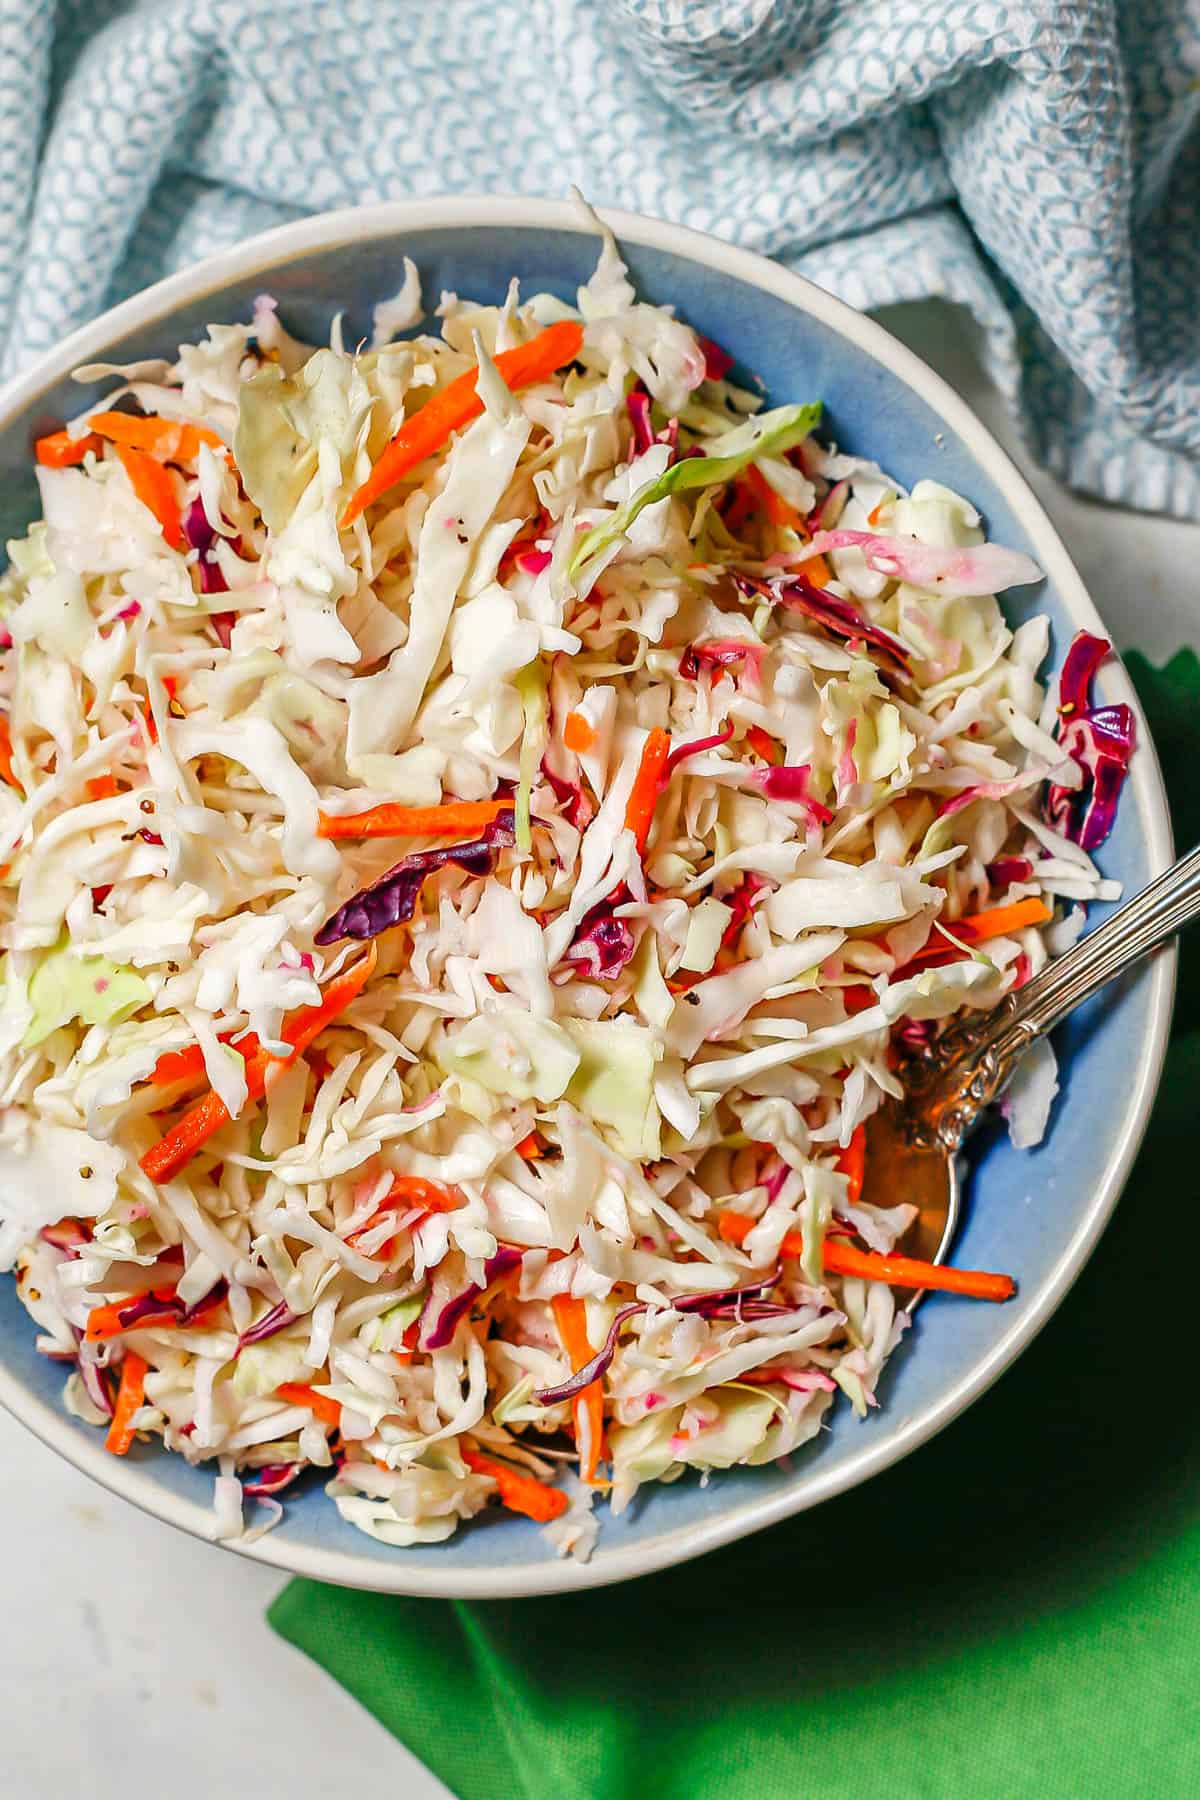 A blue and white bowl with a coleslaw mix and a fork resting in the side.